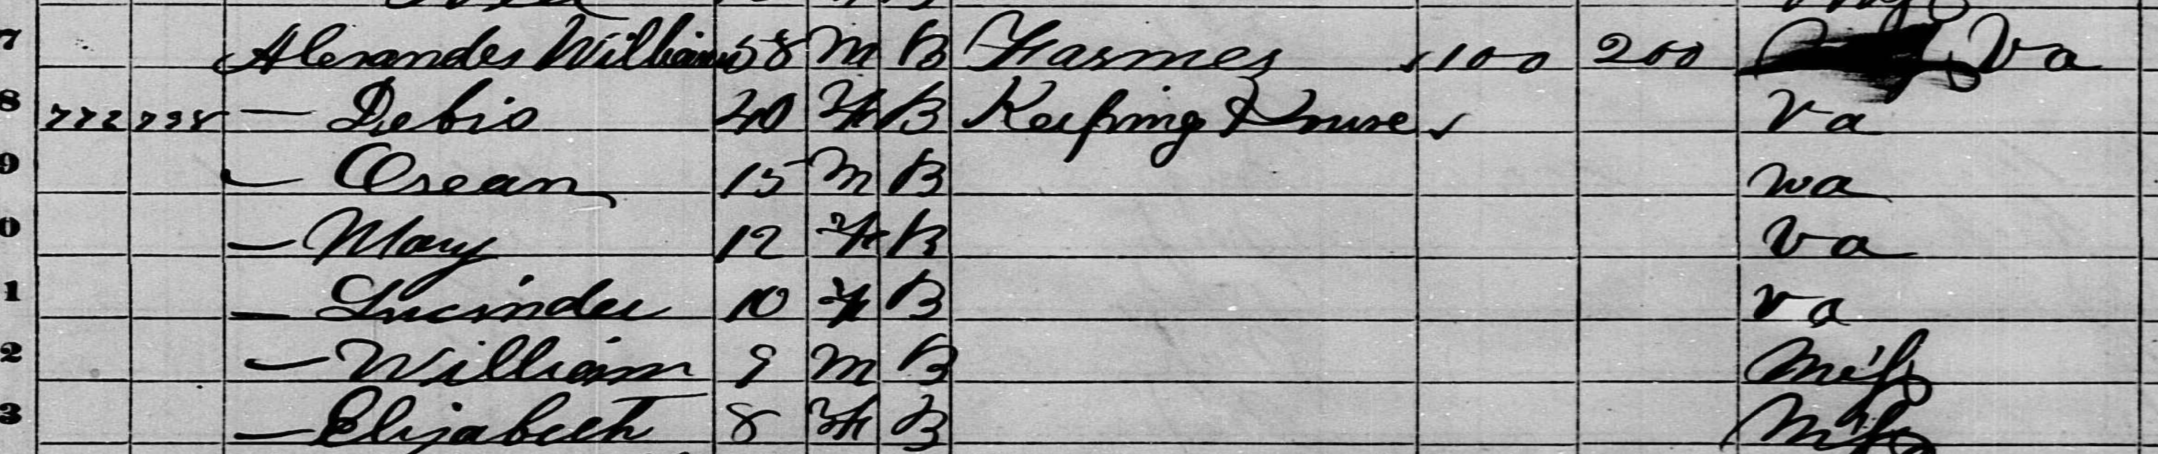 1870 Census, Clarke County, MS